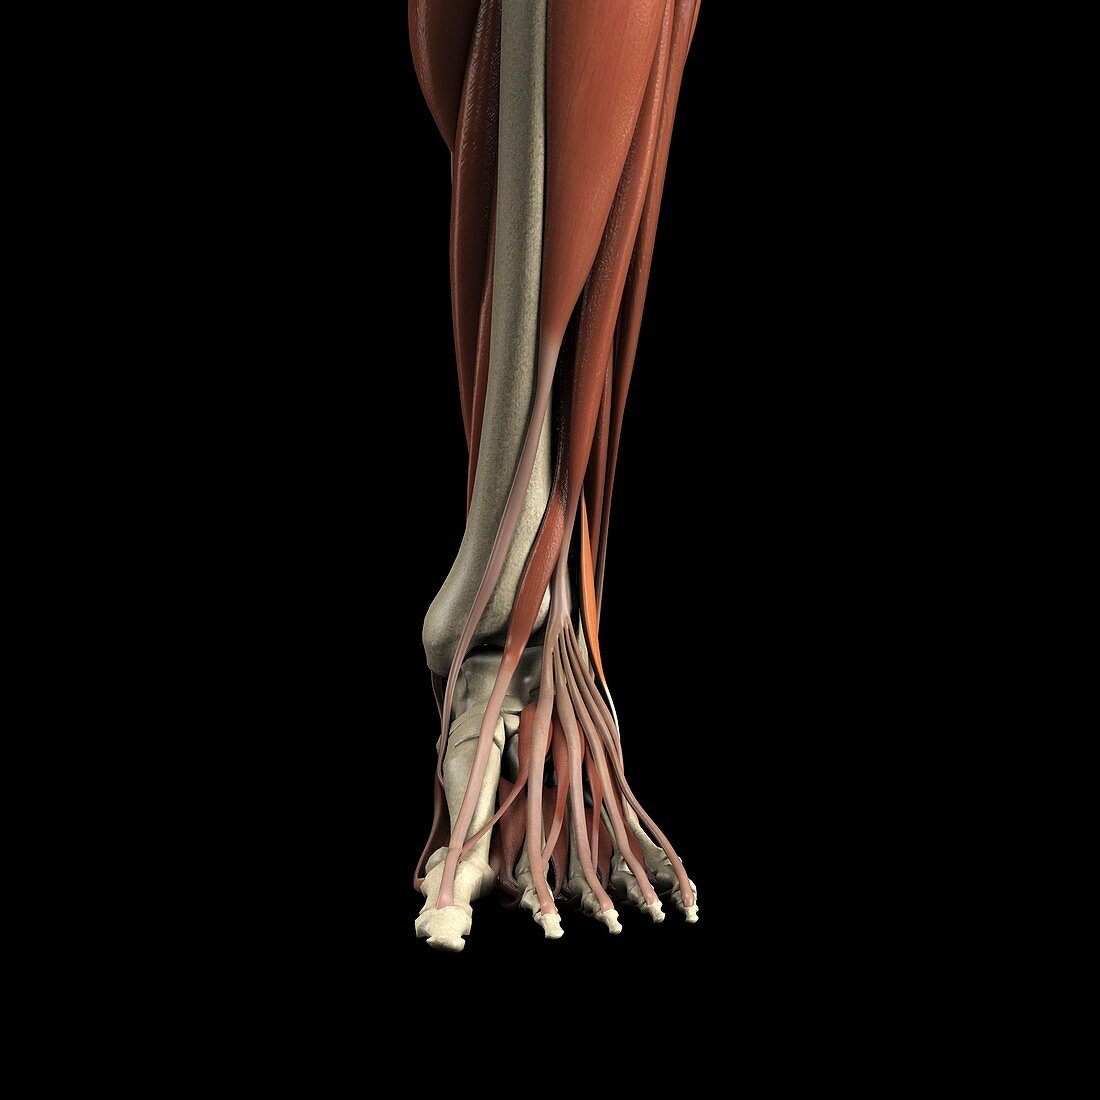 Muscles of the Foot, artwork